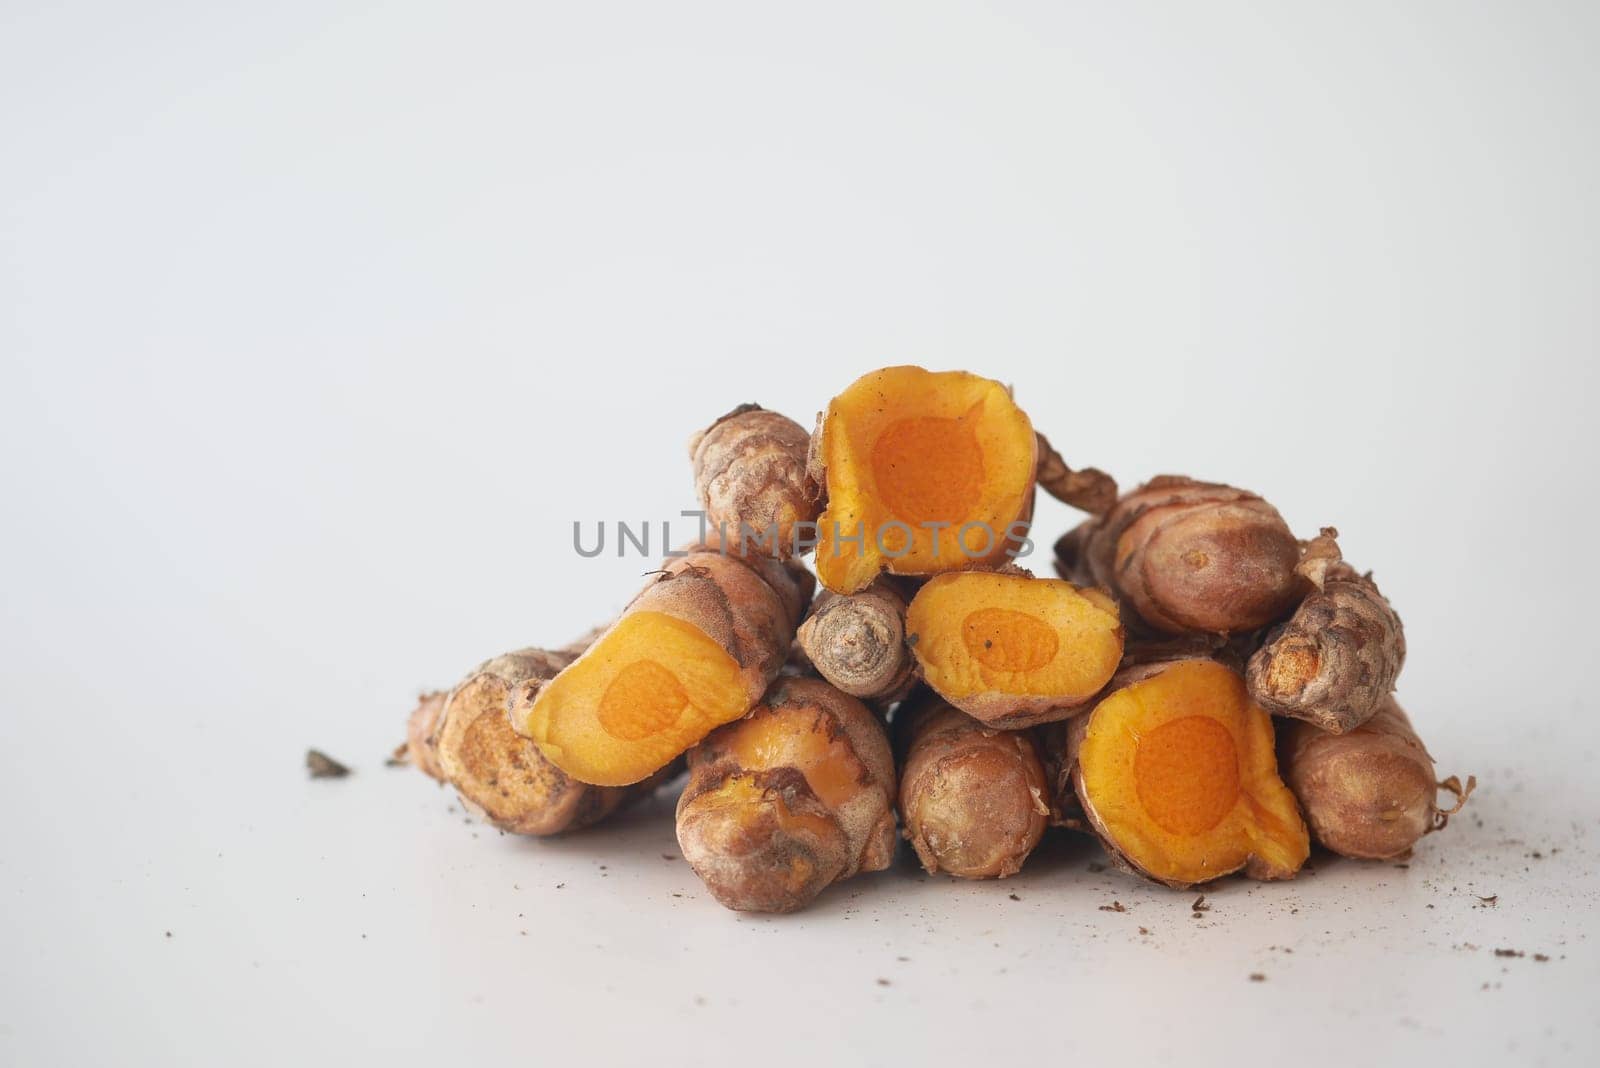 detail shot of turmeric root in bowl on table , by towfiq007